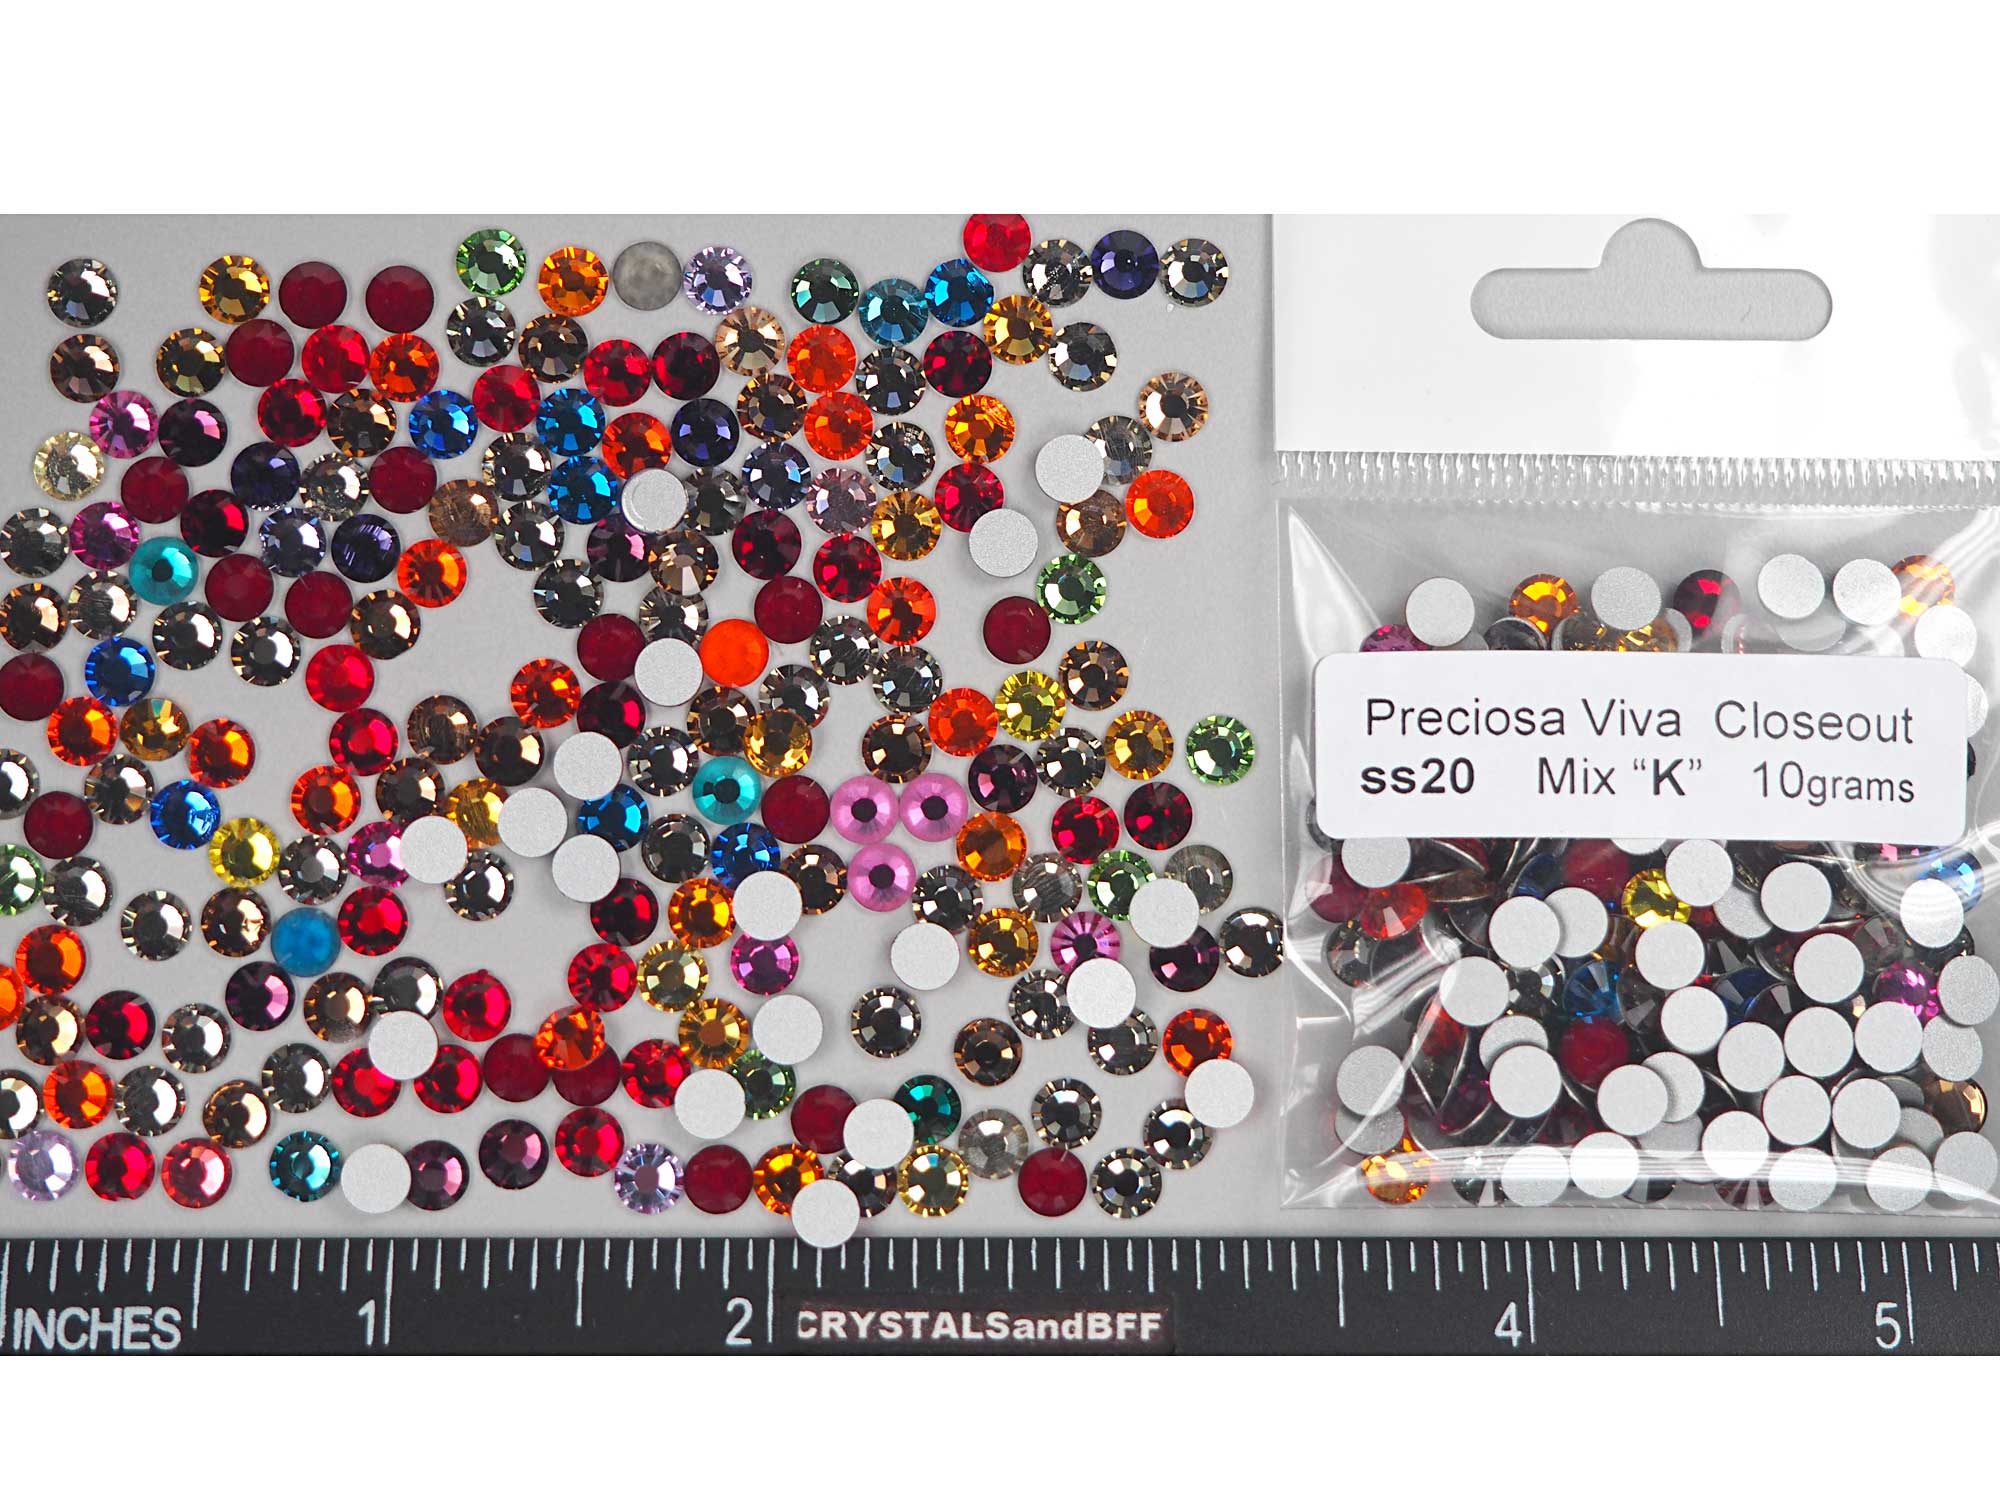 Mix Color "K" CLOSEOUT, ss20, 10grams of Preciosa VIVA Chaton Roses (Rhinestone Flatbacks), Genuine Czech Crystals, BY THE WEIGHT